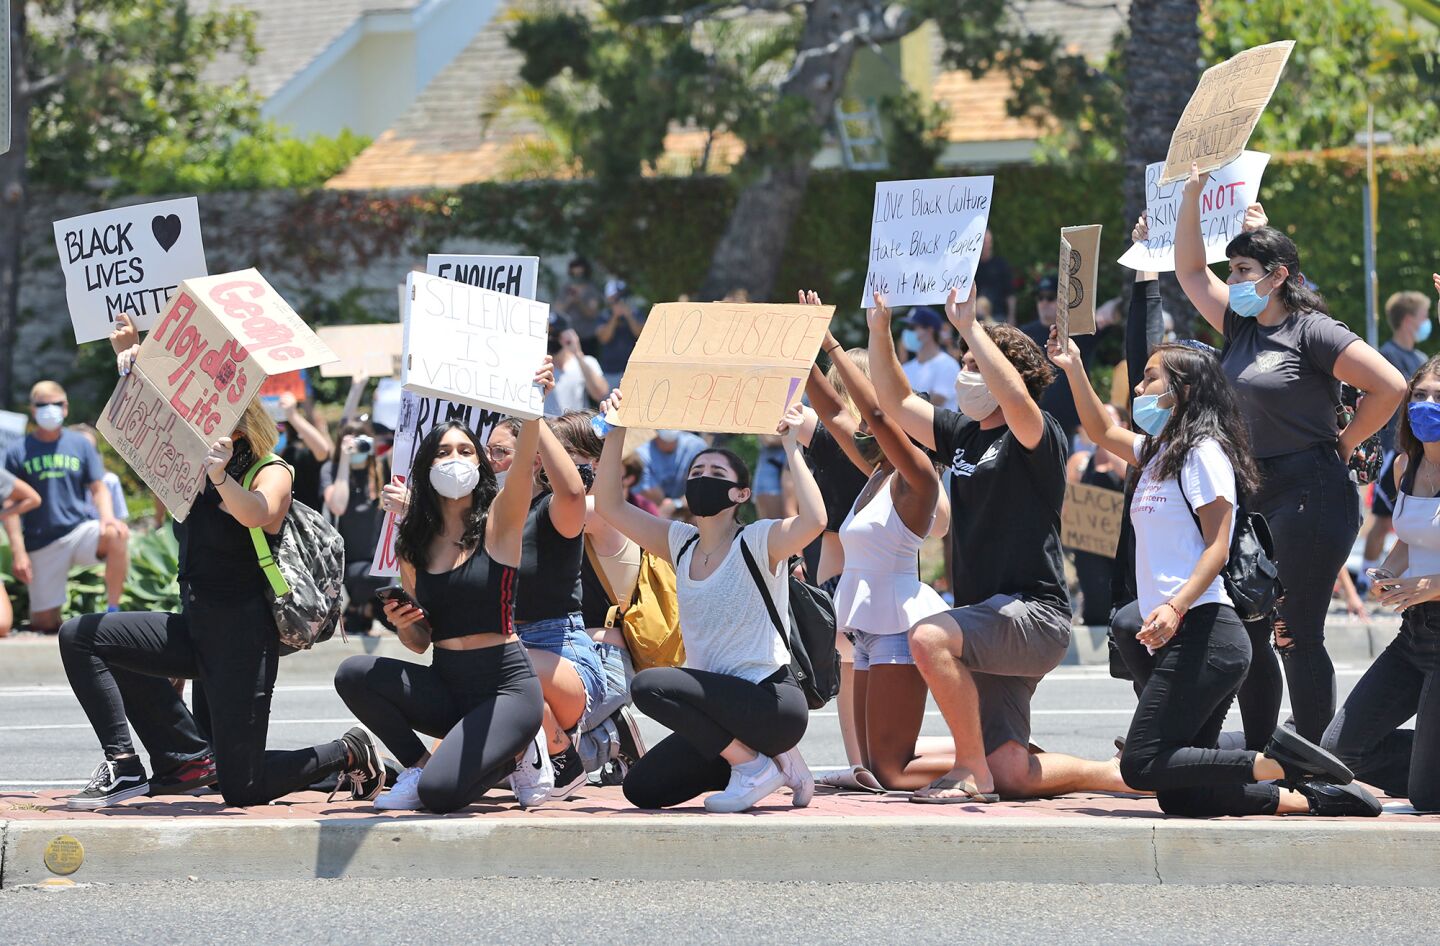 Protesters take a knee on a traffic island at the intersection of MacArthur Boulevard and Coast Highway during a Black Lives Matter protest in Newport Beach on Wednesday.